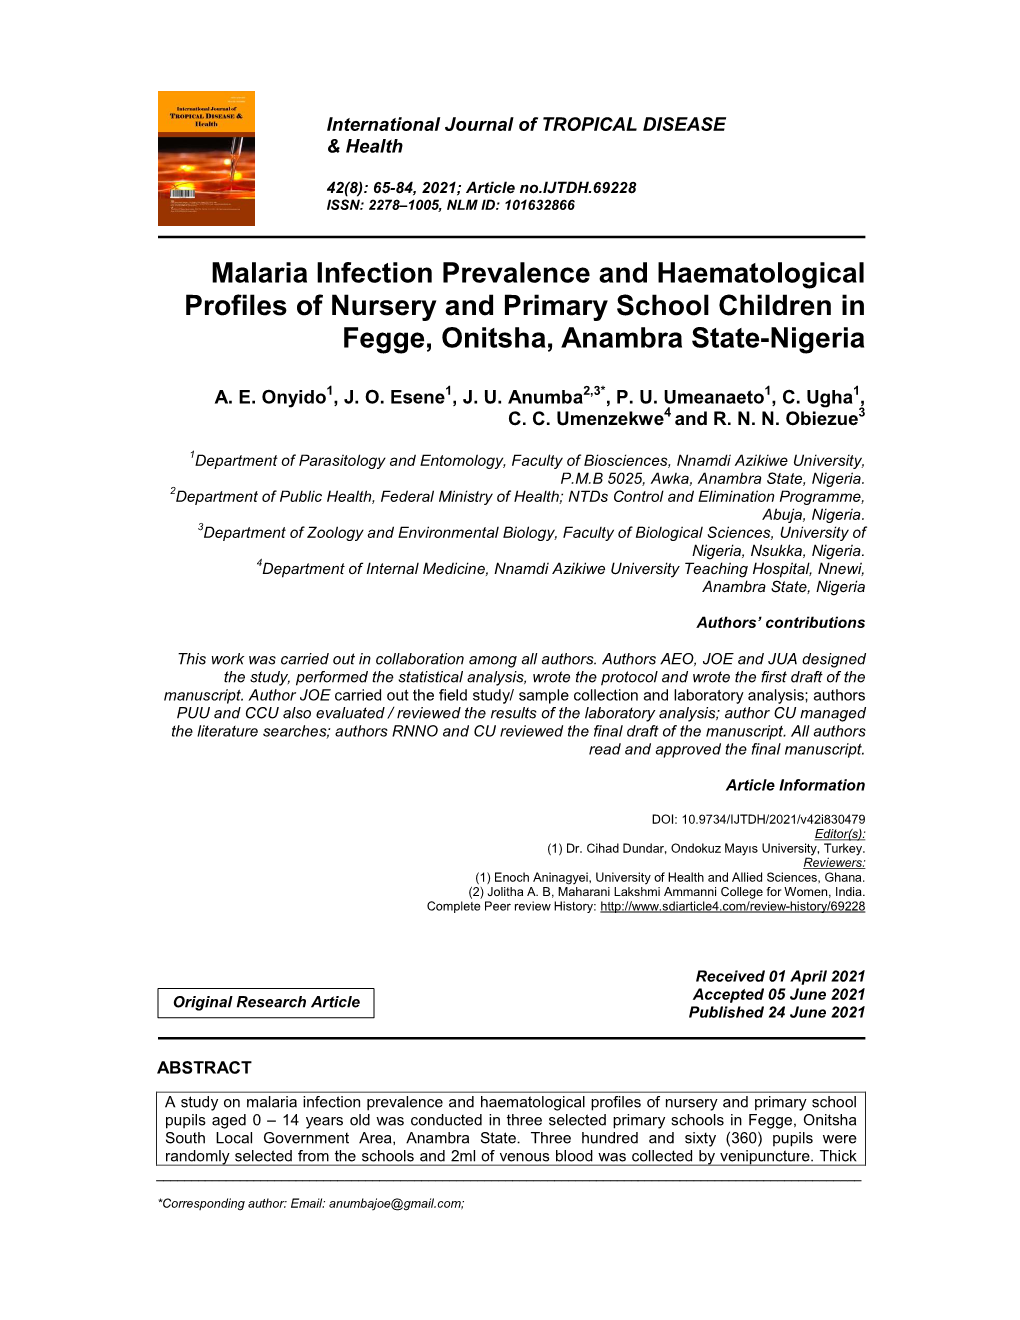 Malaria Infection Prevalence and Haematological Profiles of Nursery and Primary School Children in Fegge, Onitsha, Anambra State-Nigeria